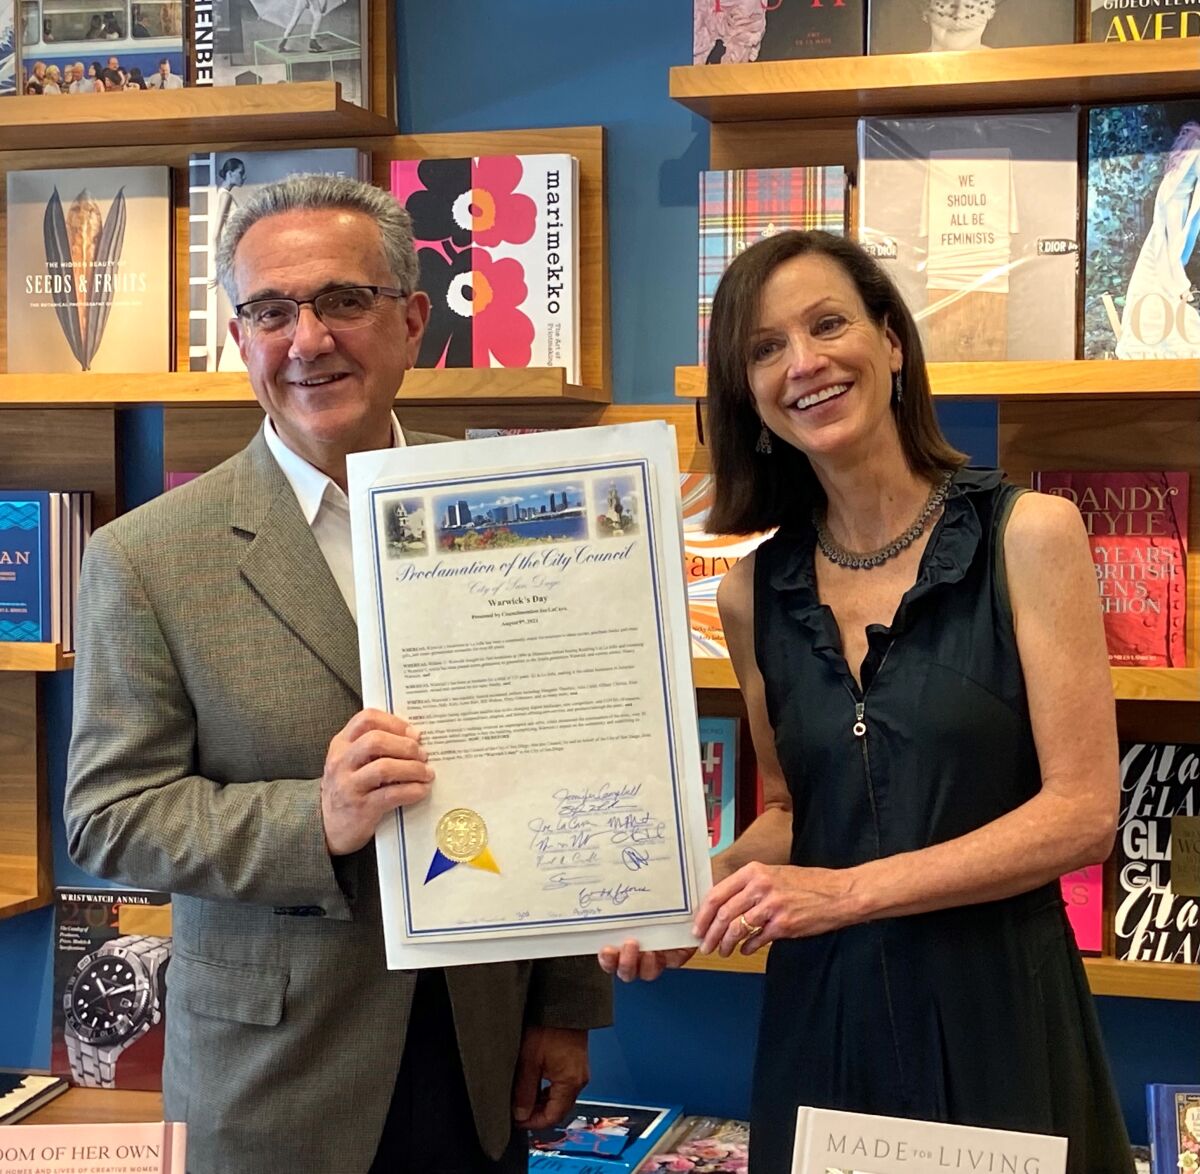 San Diego Councilman Joe LaCava gives a proclamation to Warwick's bookstore owner Nancy Warwick declaring Warwick's Day.